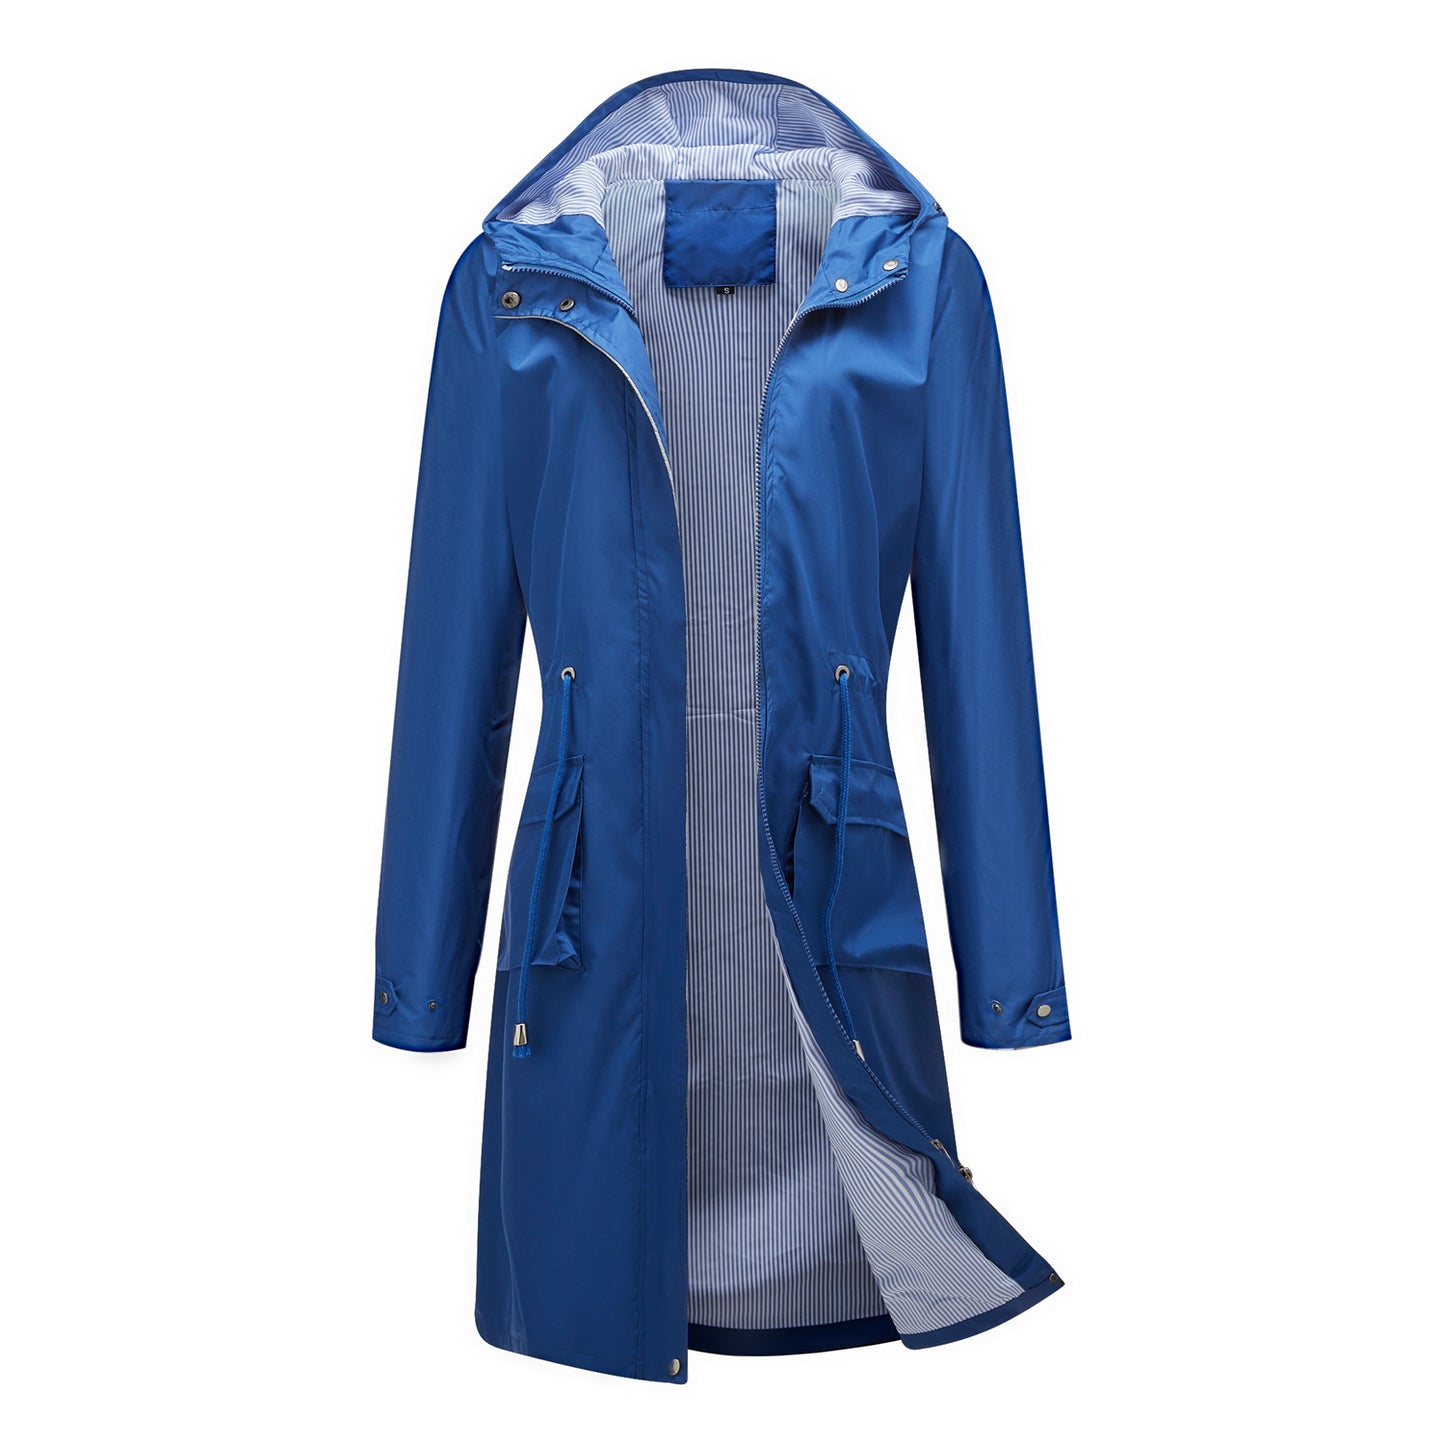 Long Casual Hooded Jacket For Women